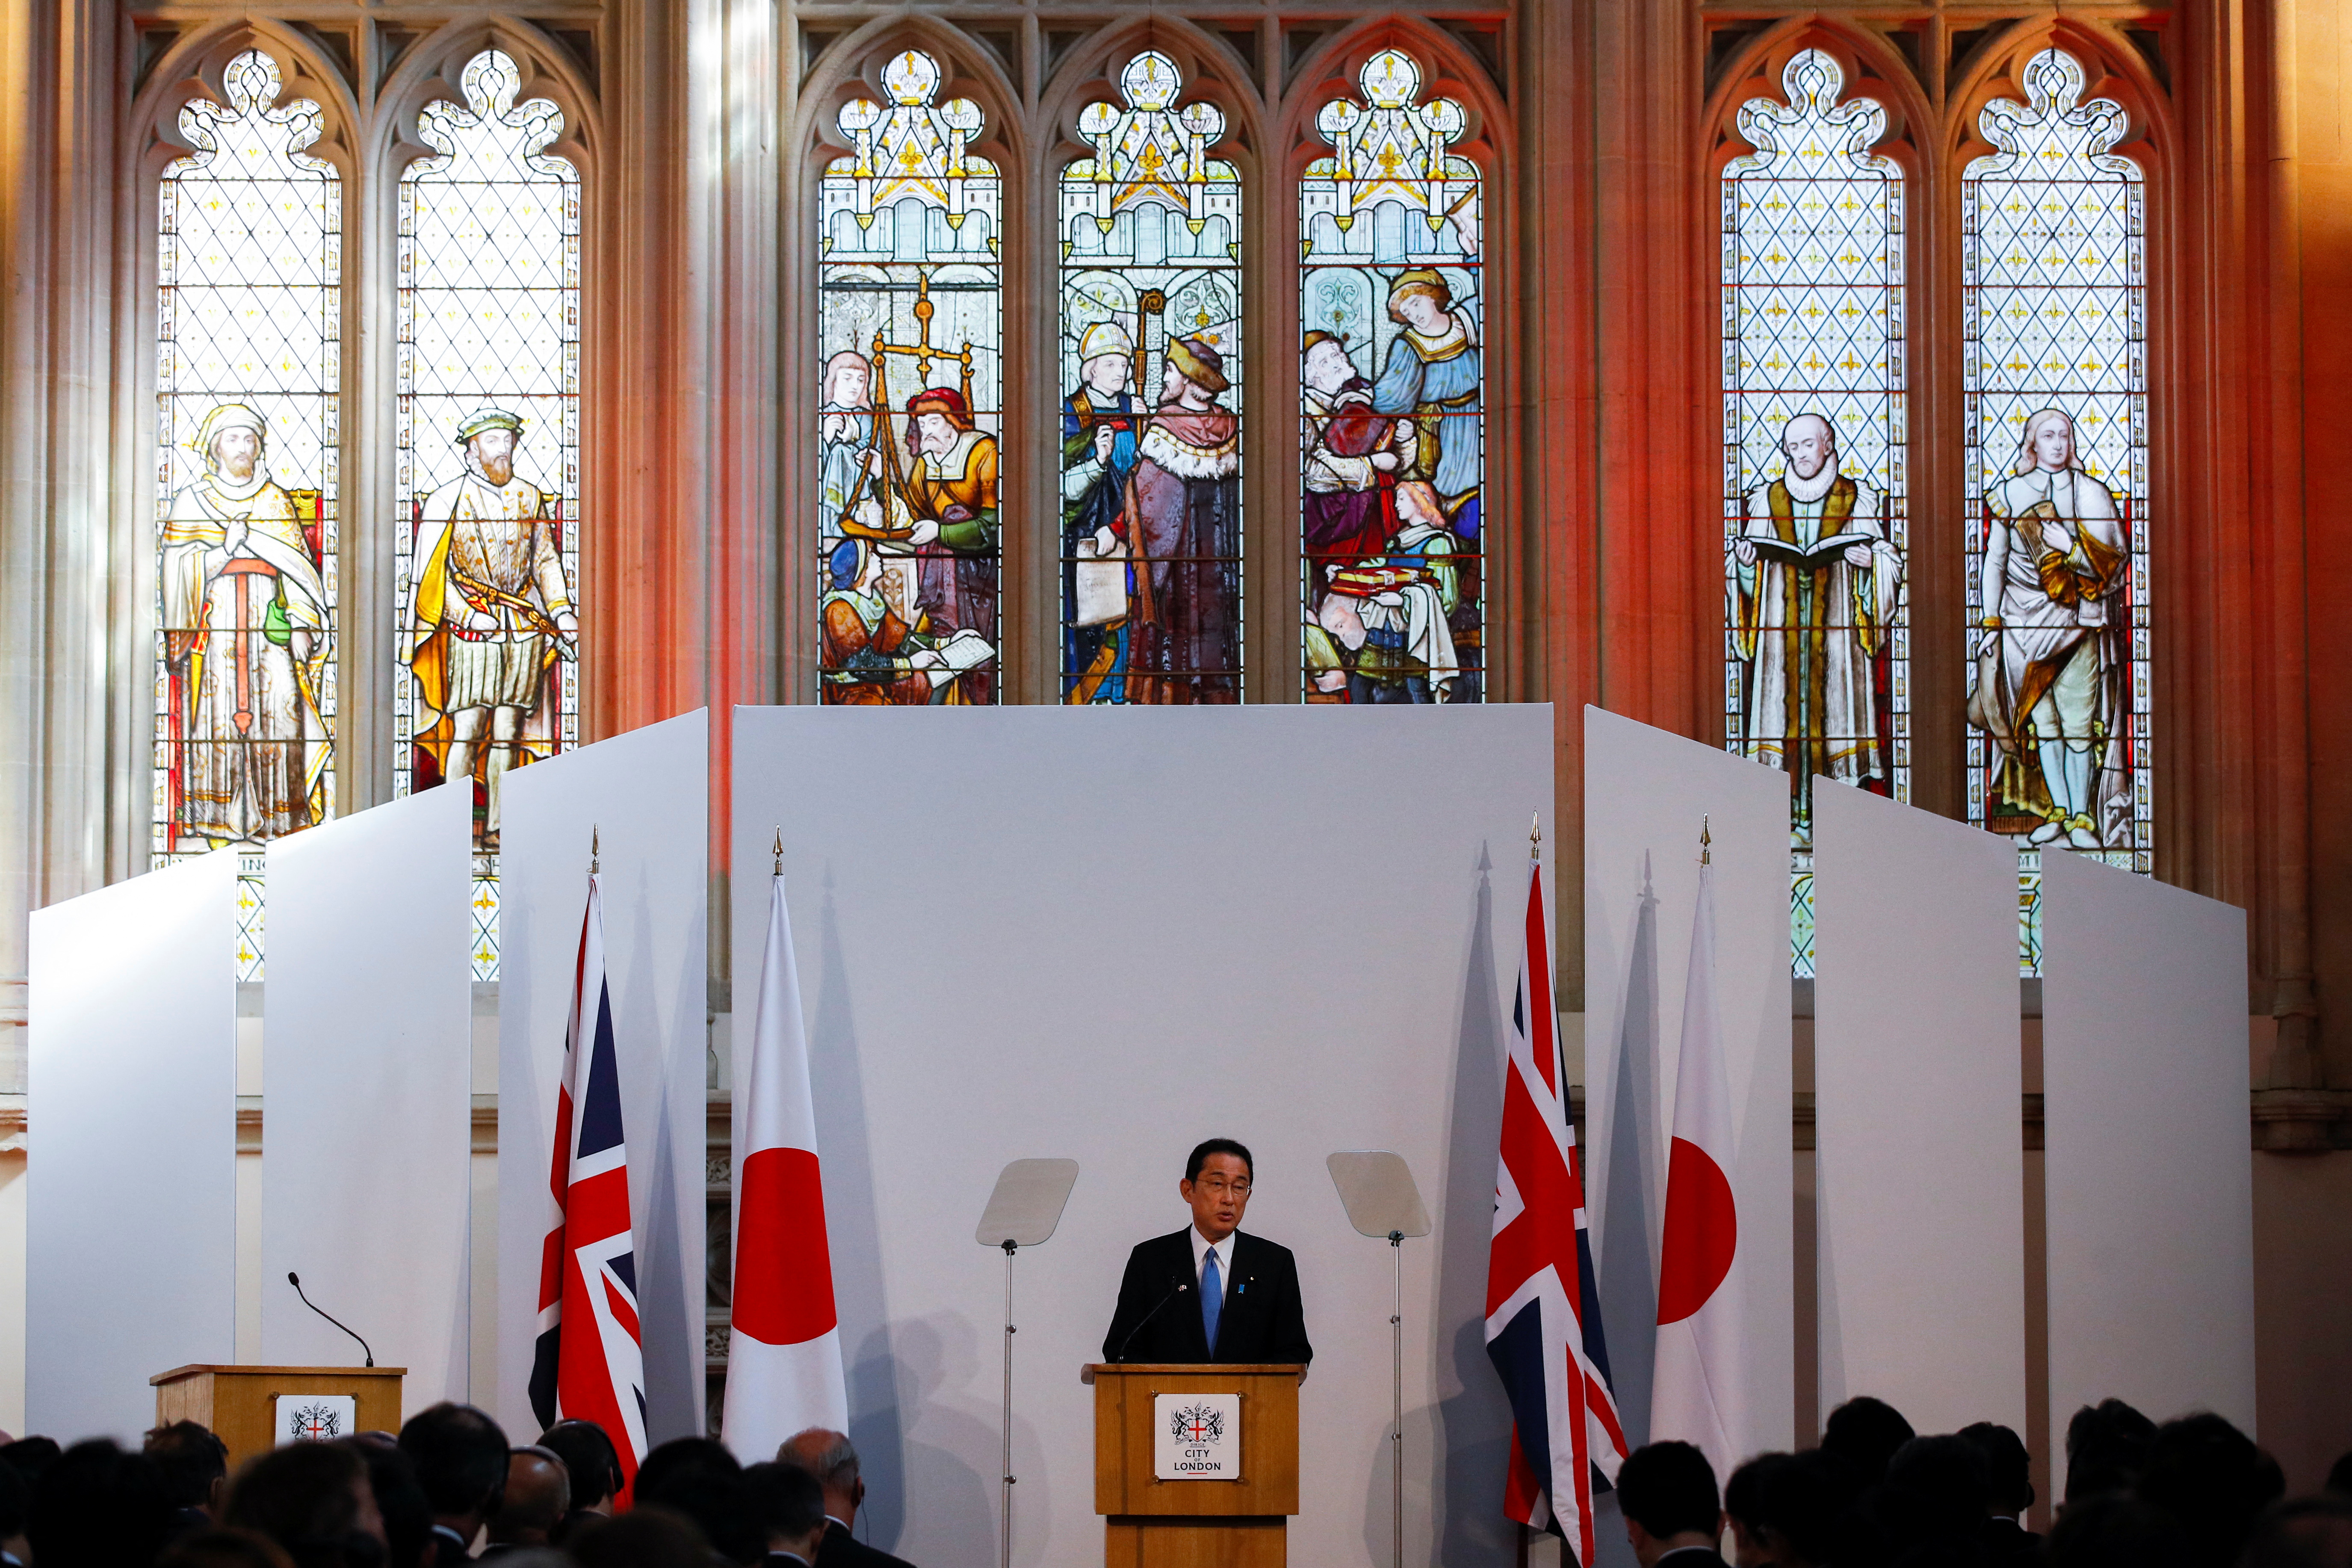 Japanese PM Kishida delivers a speech at the Guildhall in London